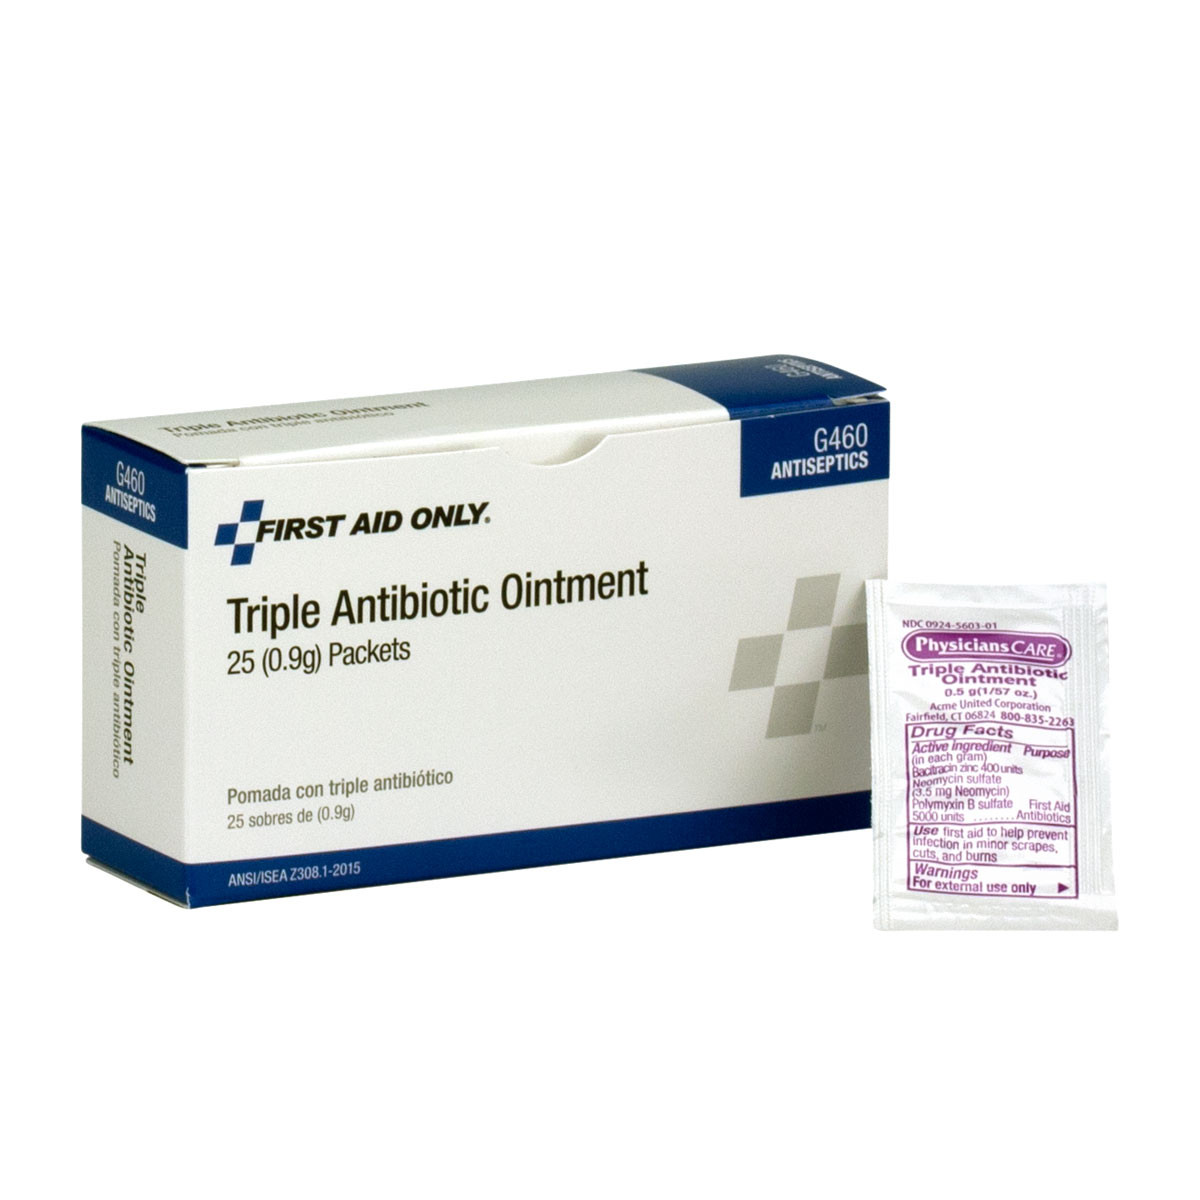 Triple Antibiotic Ointment (0.5g) Packets